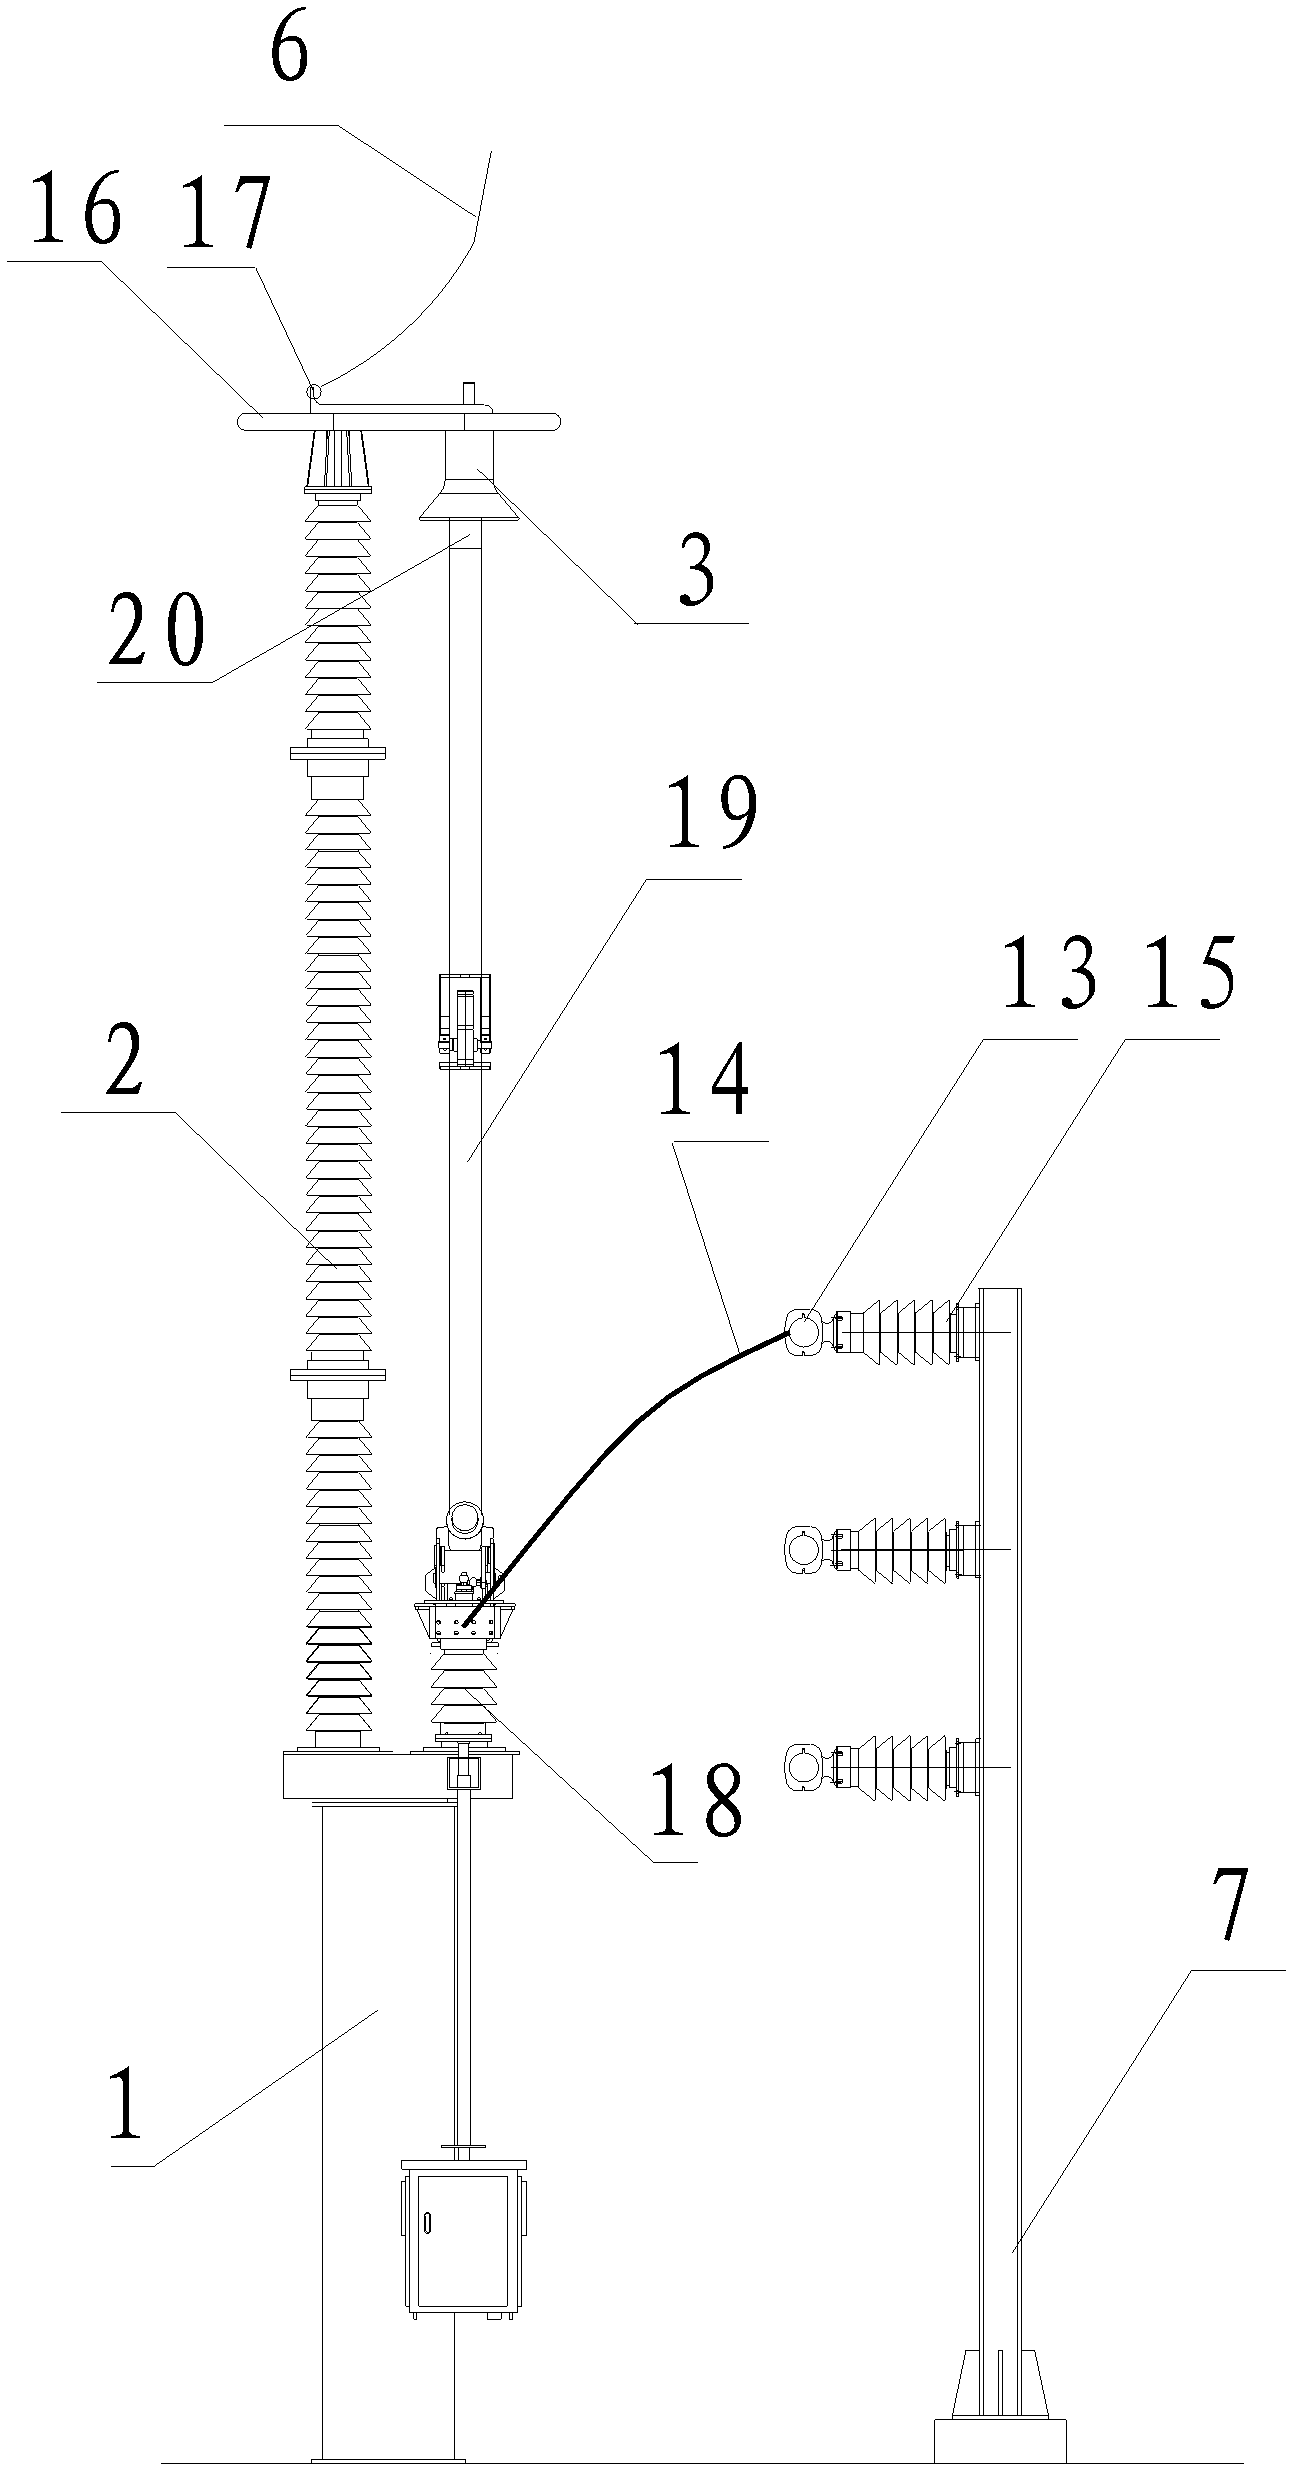 Direct-current ice-melting isolating switch